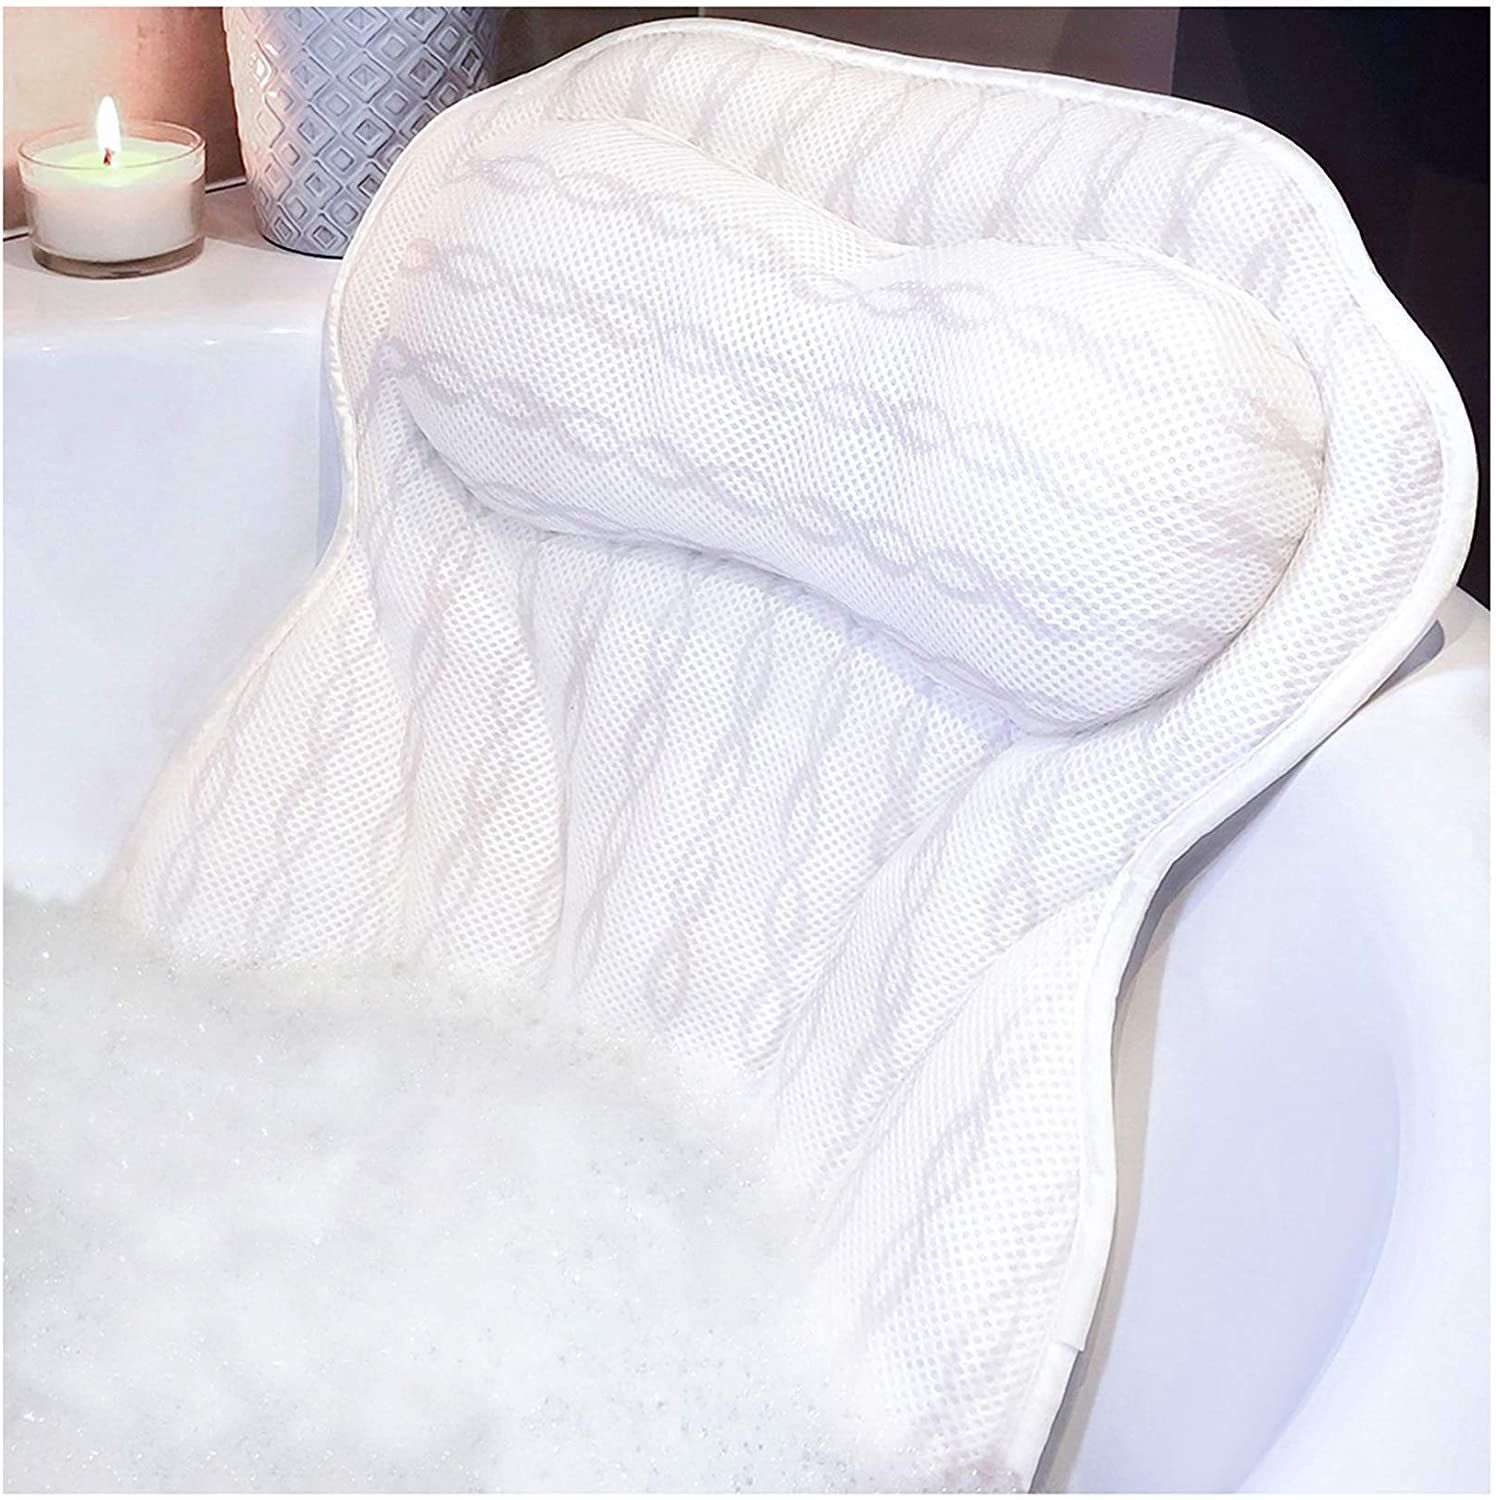 Bath pillow Incredibly relaxing SPA experience at home new model of luxury durable bath pillow for head and neck